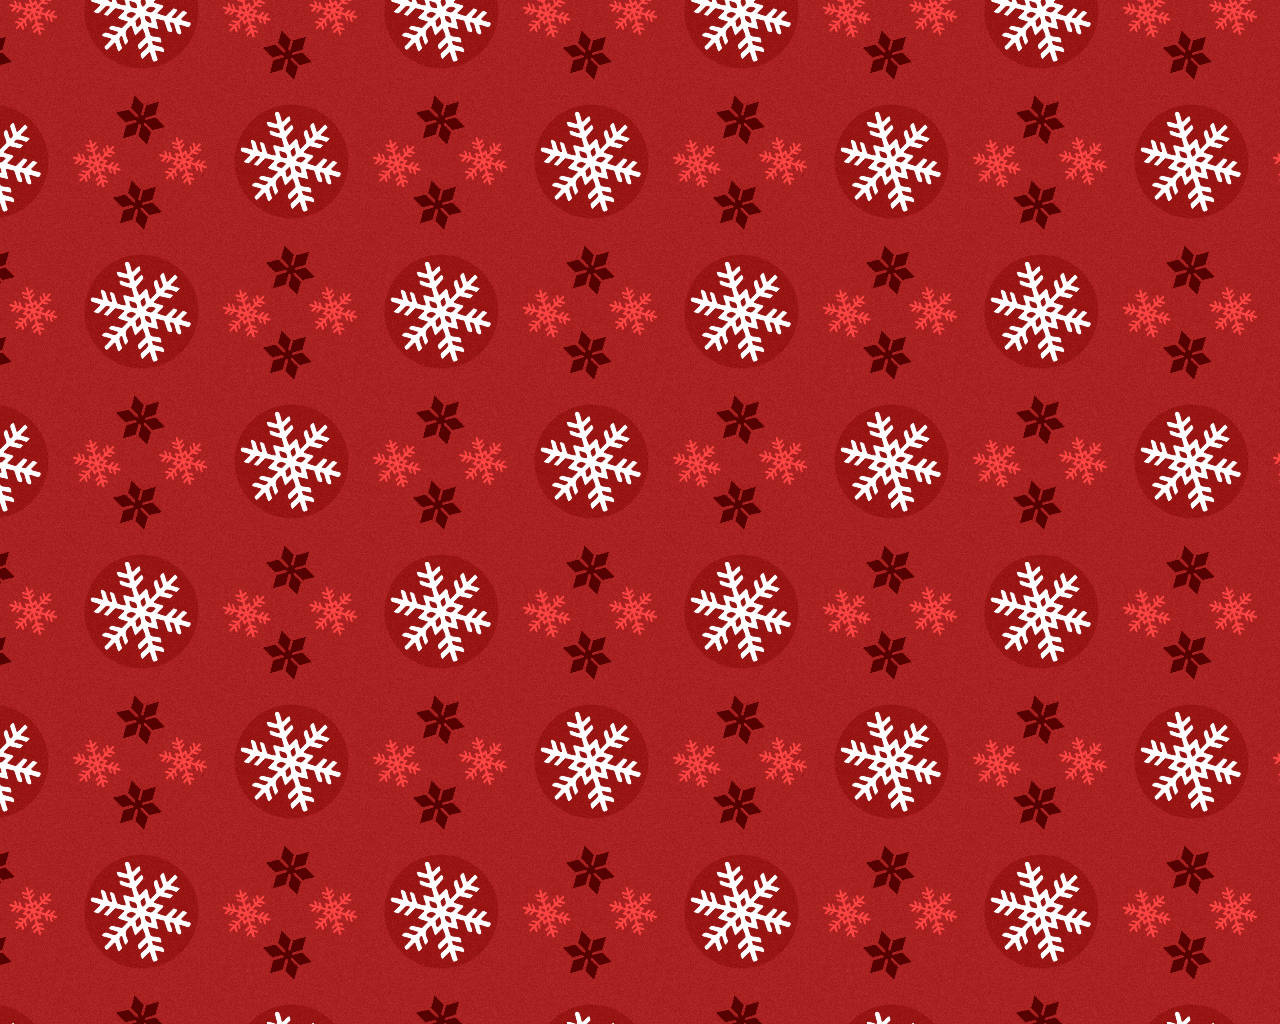 Snowflakes Patterned Red Christmas Background Wallpaper